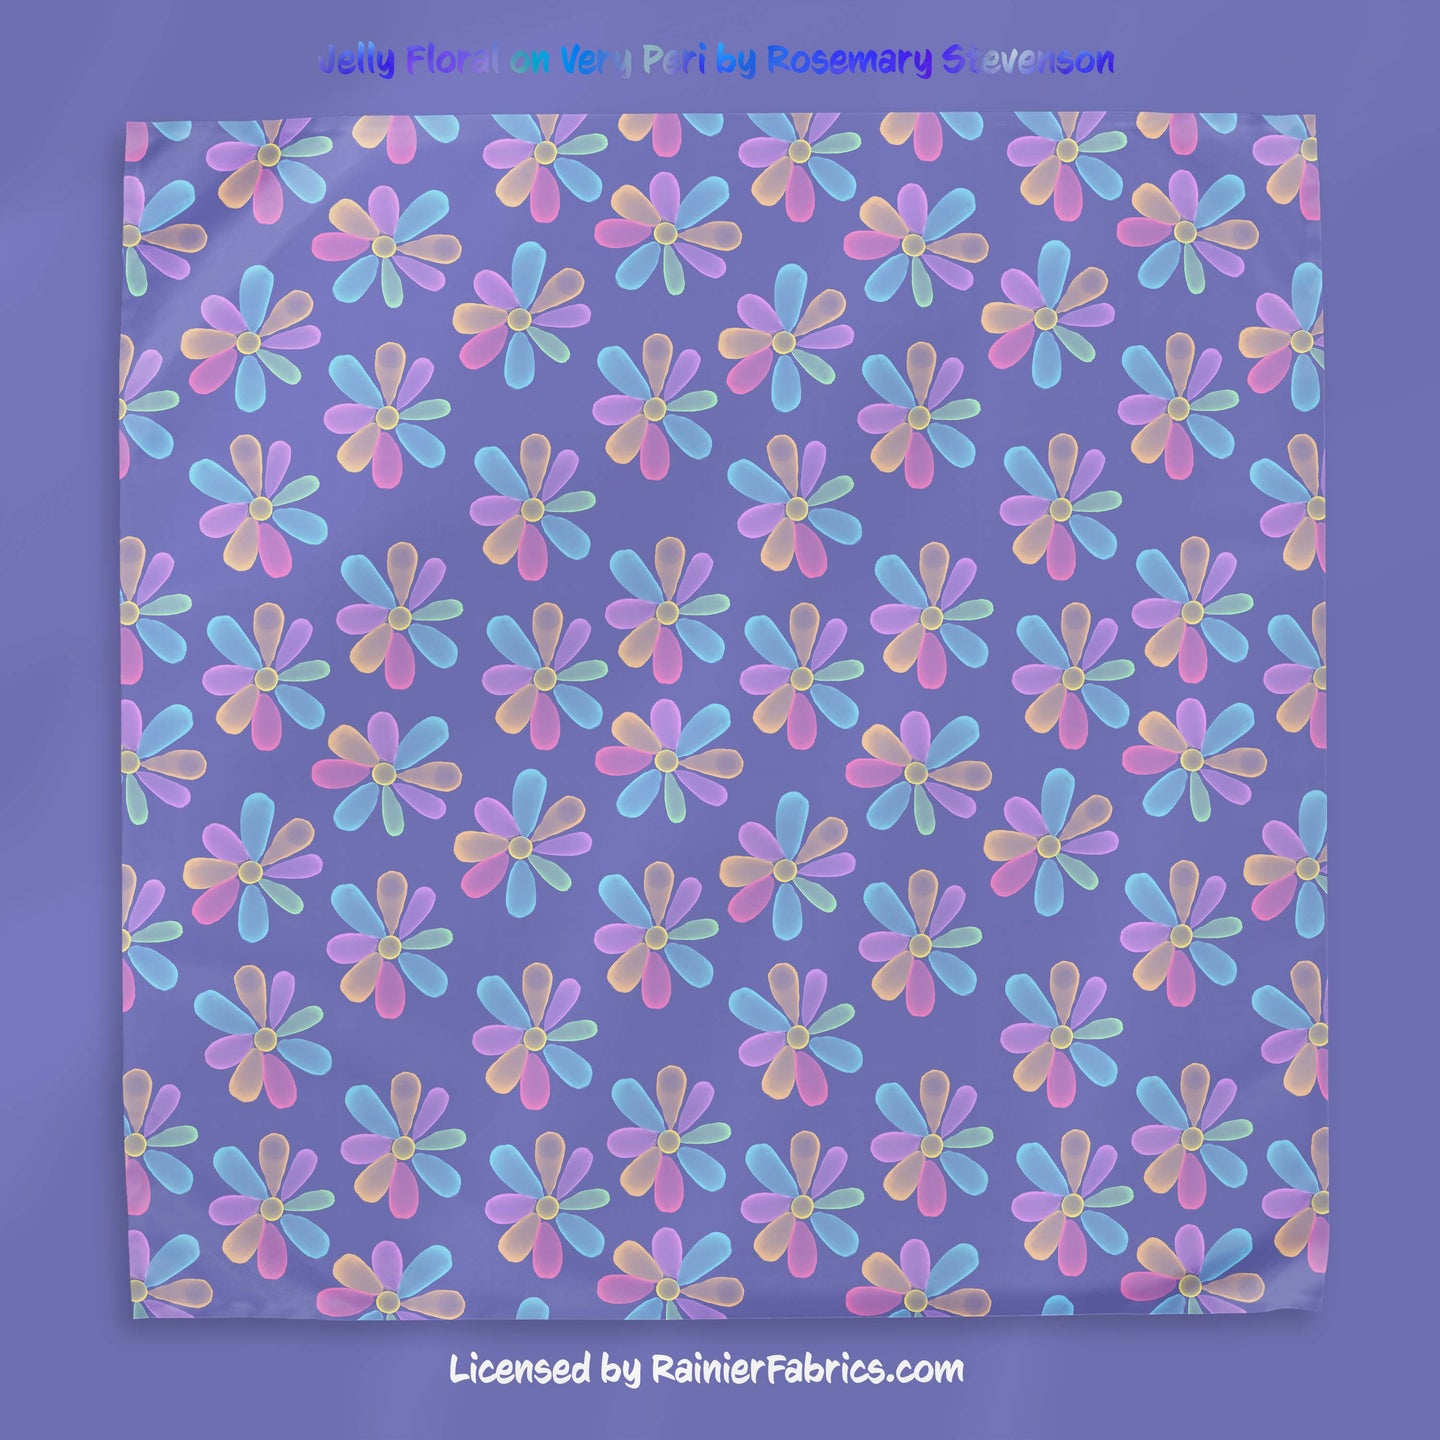 Jelly Floral by Rosemary Stevenson - 2-5 day turnaround - Order by 1/2 yard; Description of bases below